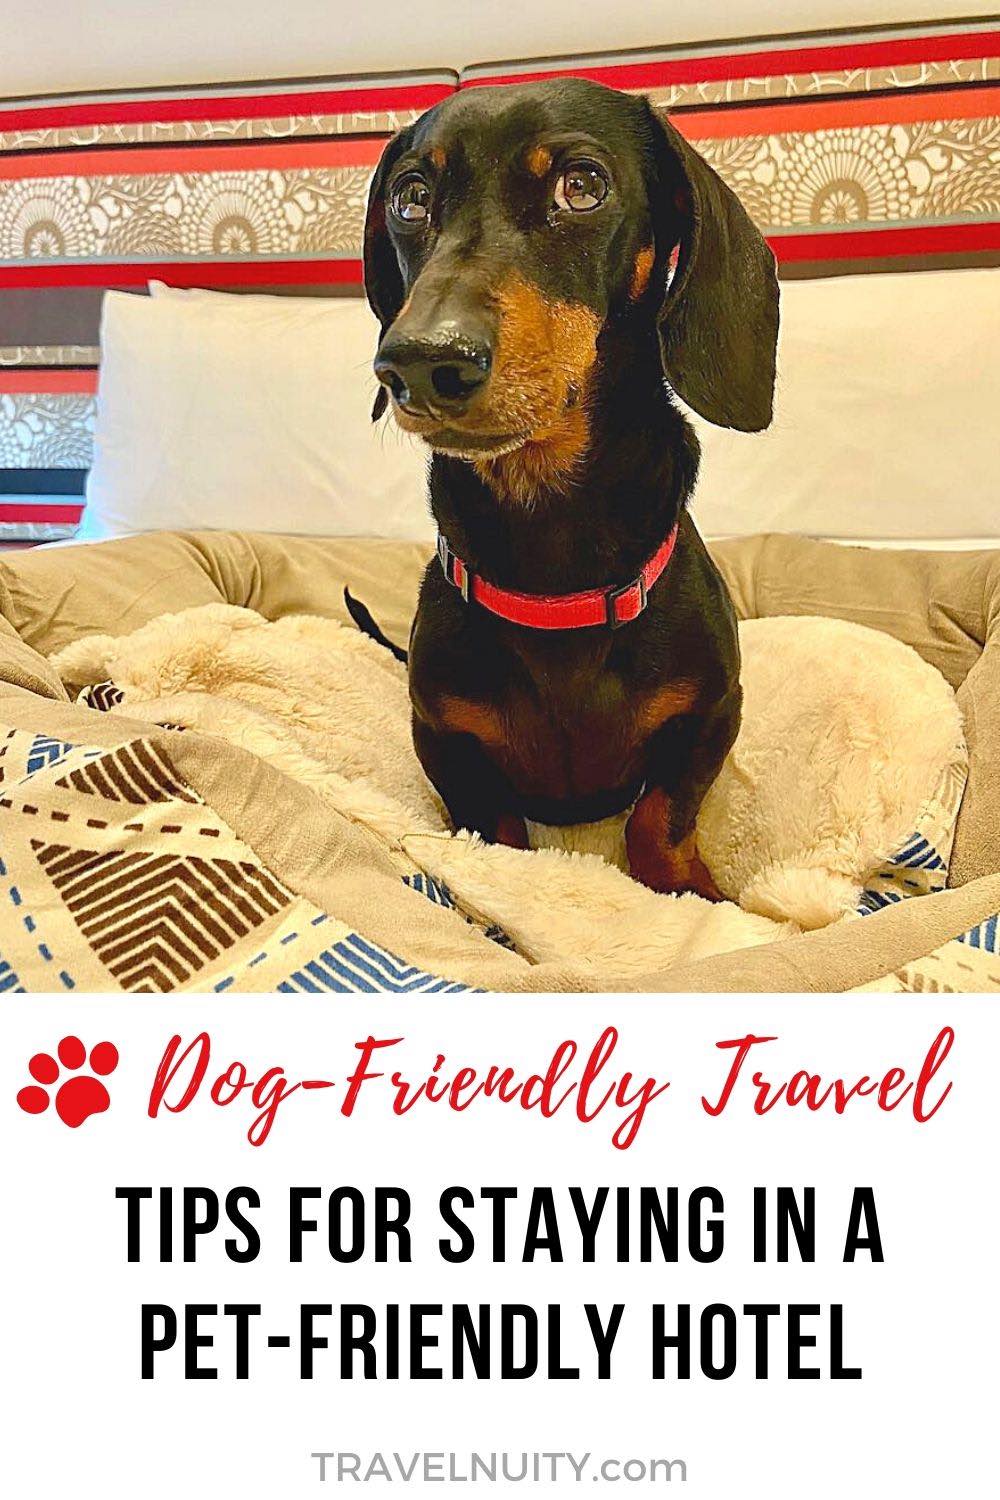 9 Tips for Staying in a PetFriendly Hotel with Your Dog Travelnuity